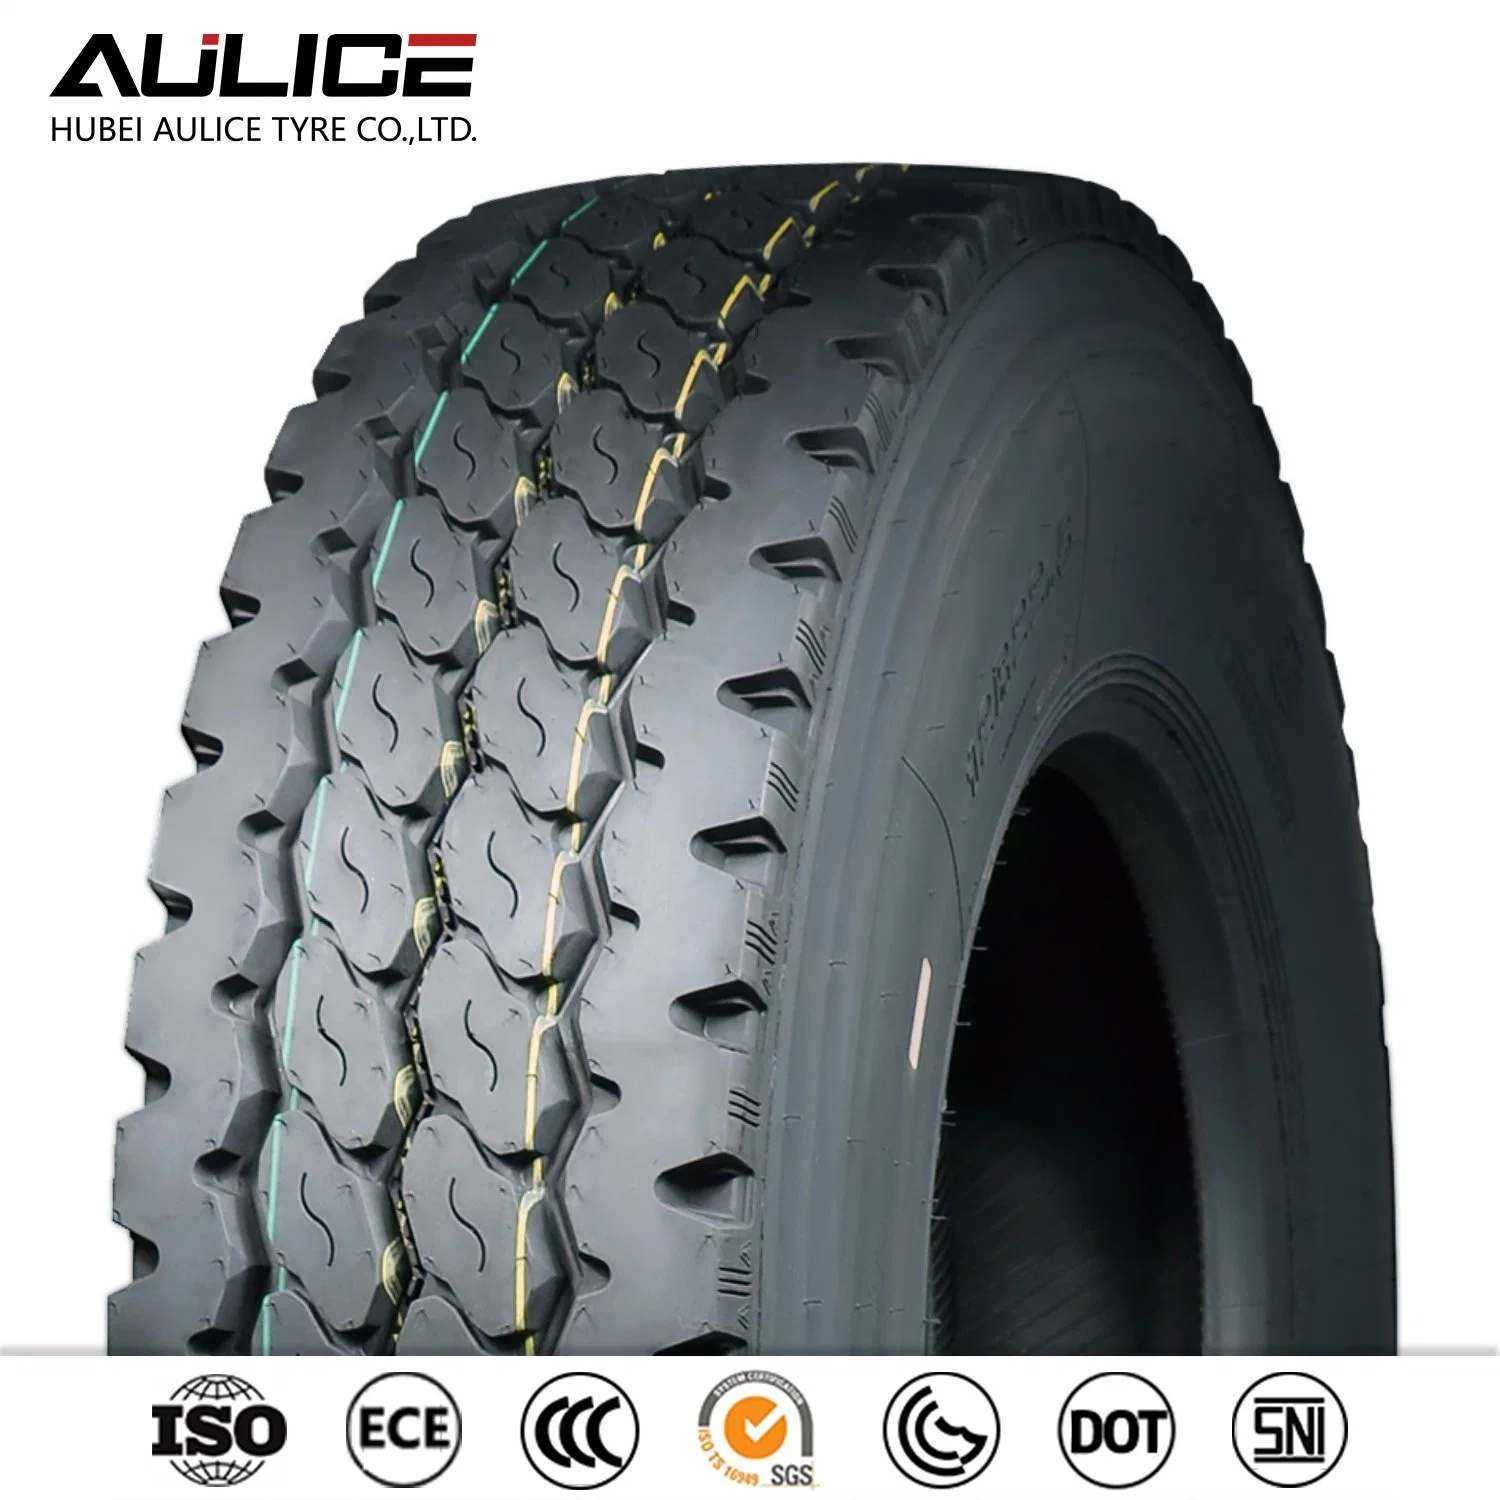 13R22.5 18PR radial truck tyre, AR869 top tire brands AULICE TBR/OTR tyres factory Tubeless tire heavy duty truck tires